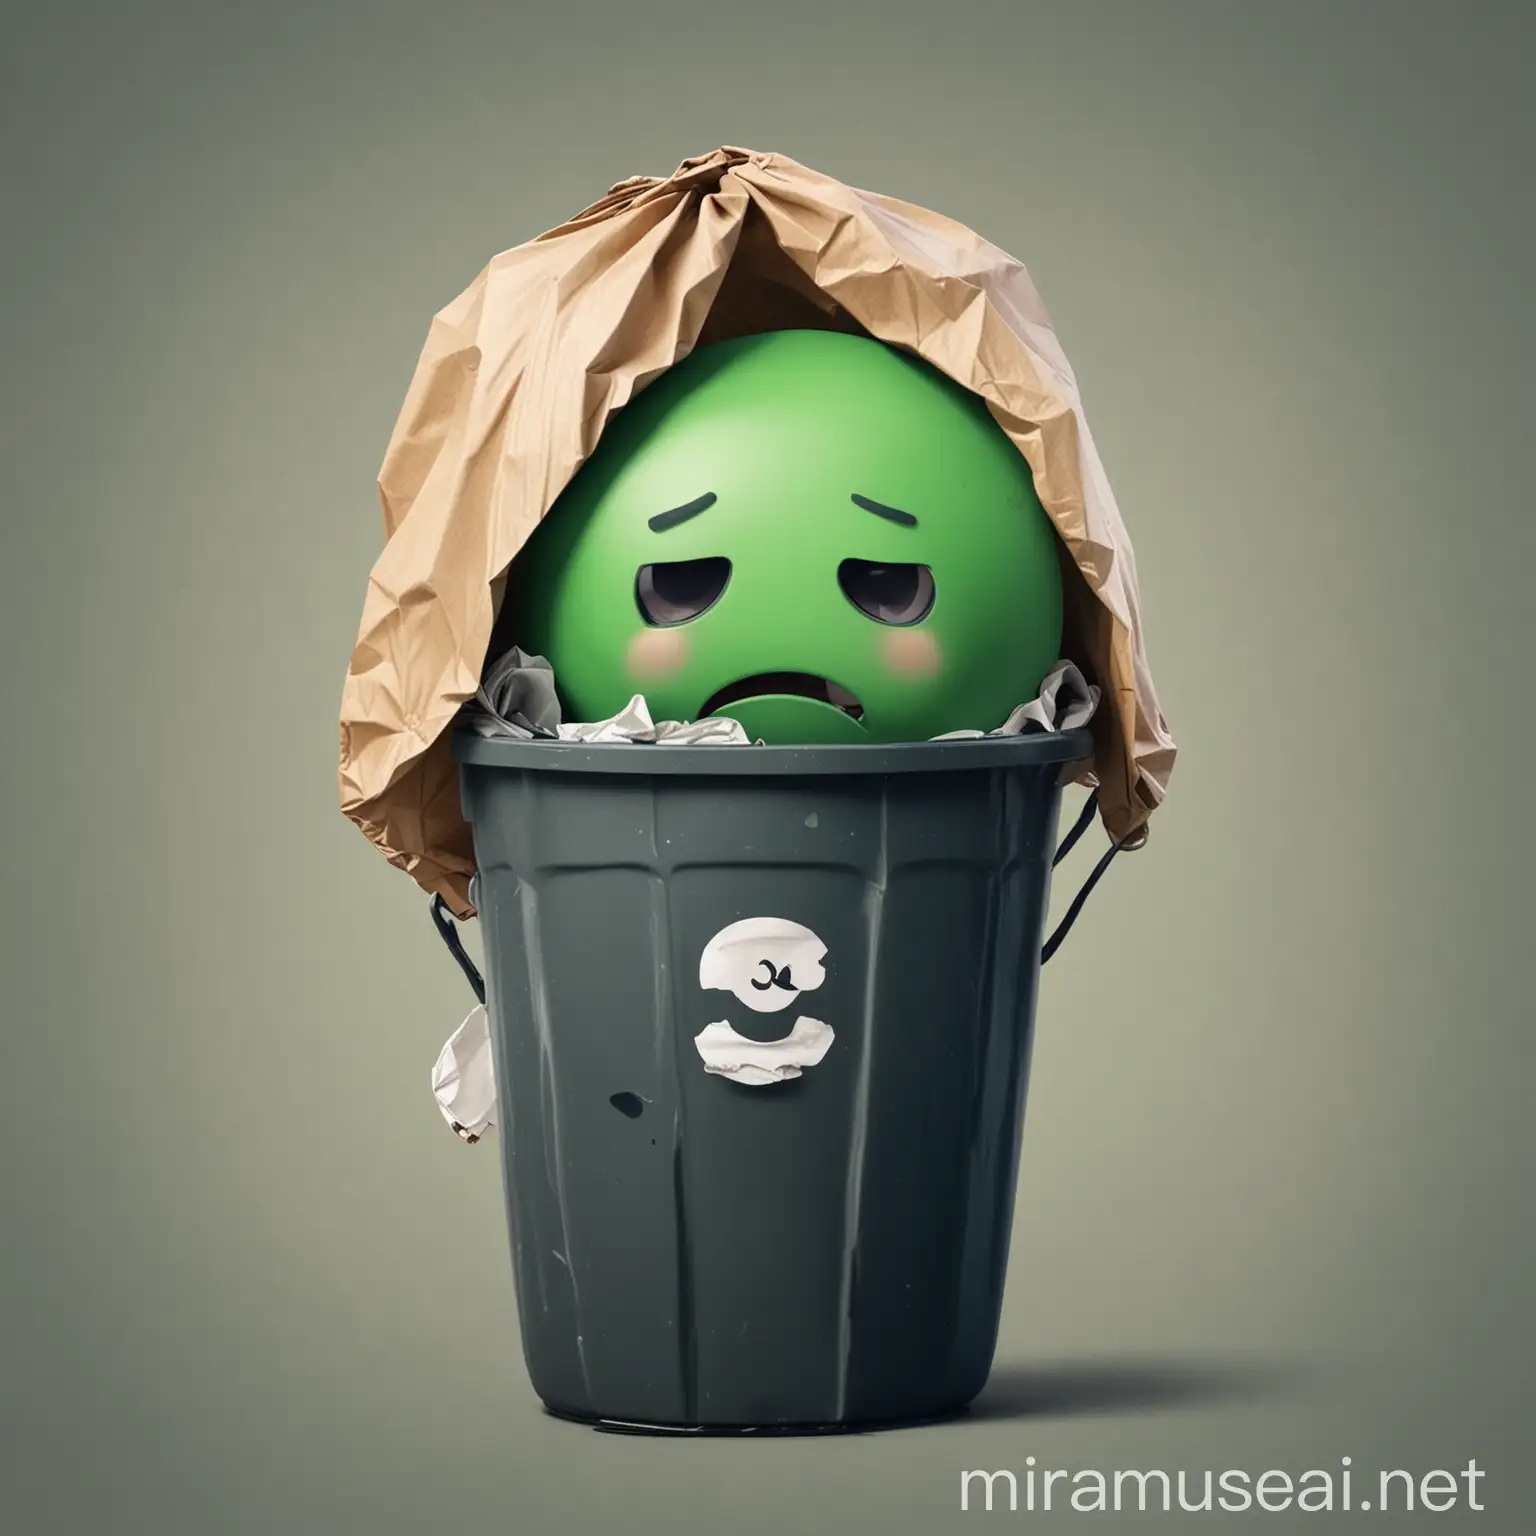 WhatsApp Sad Face Icon Throwing Himself into Trash Can with Bag